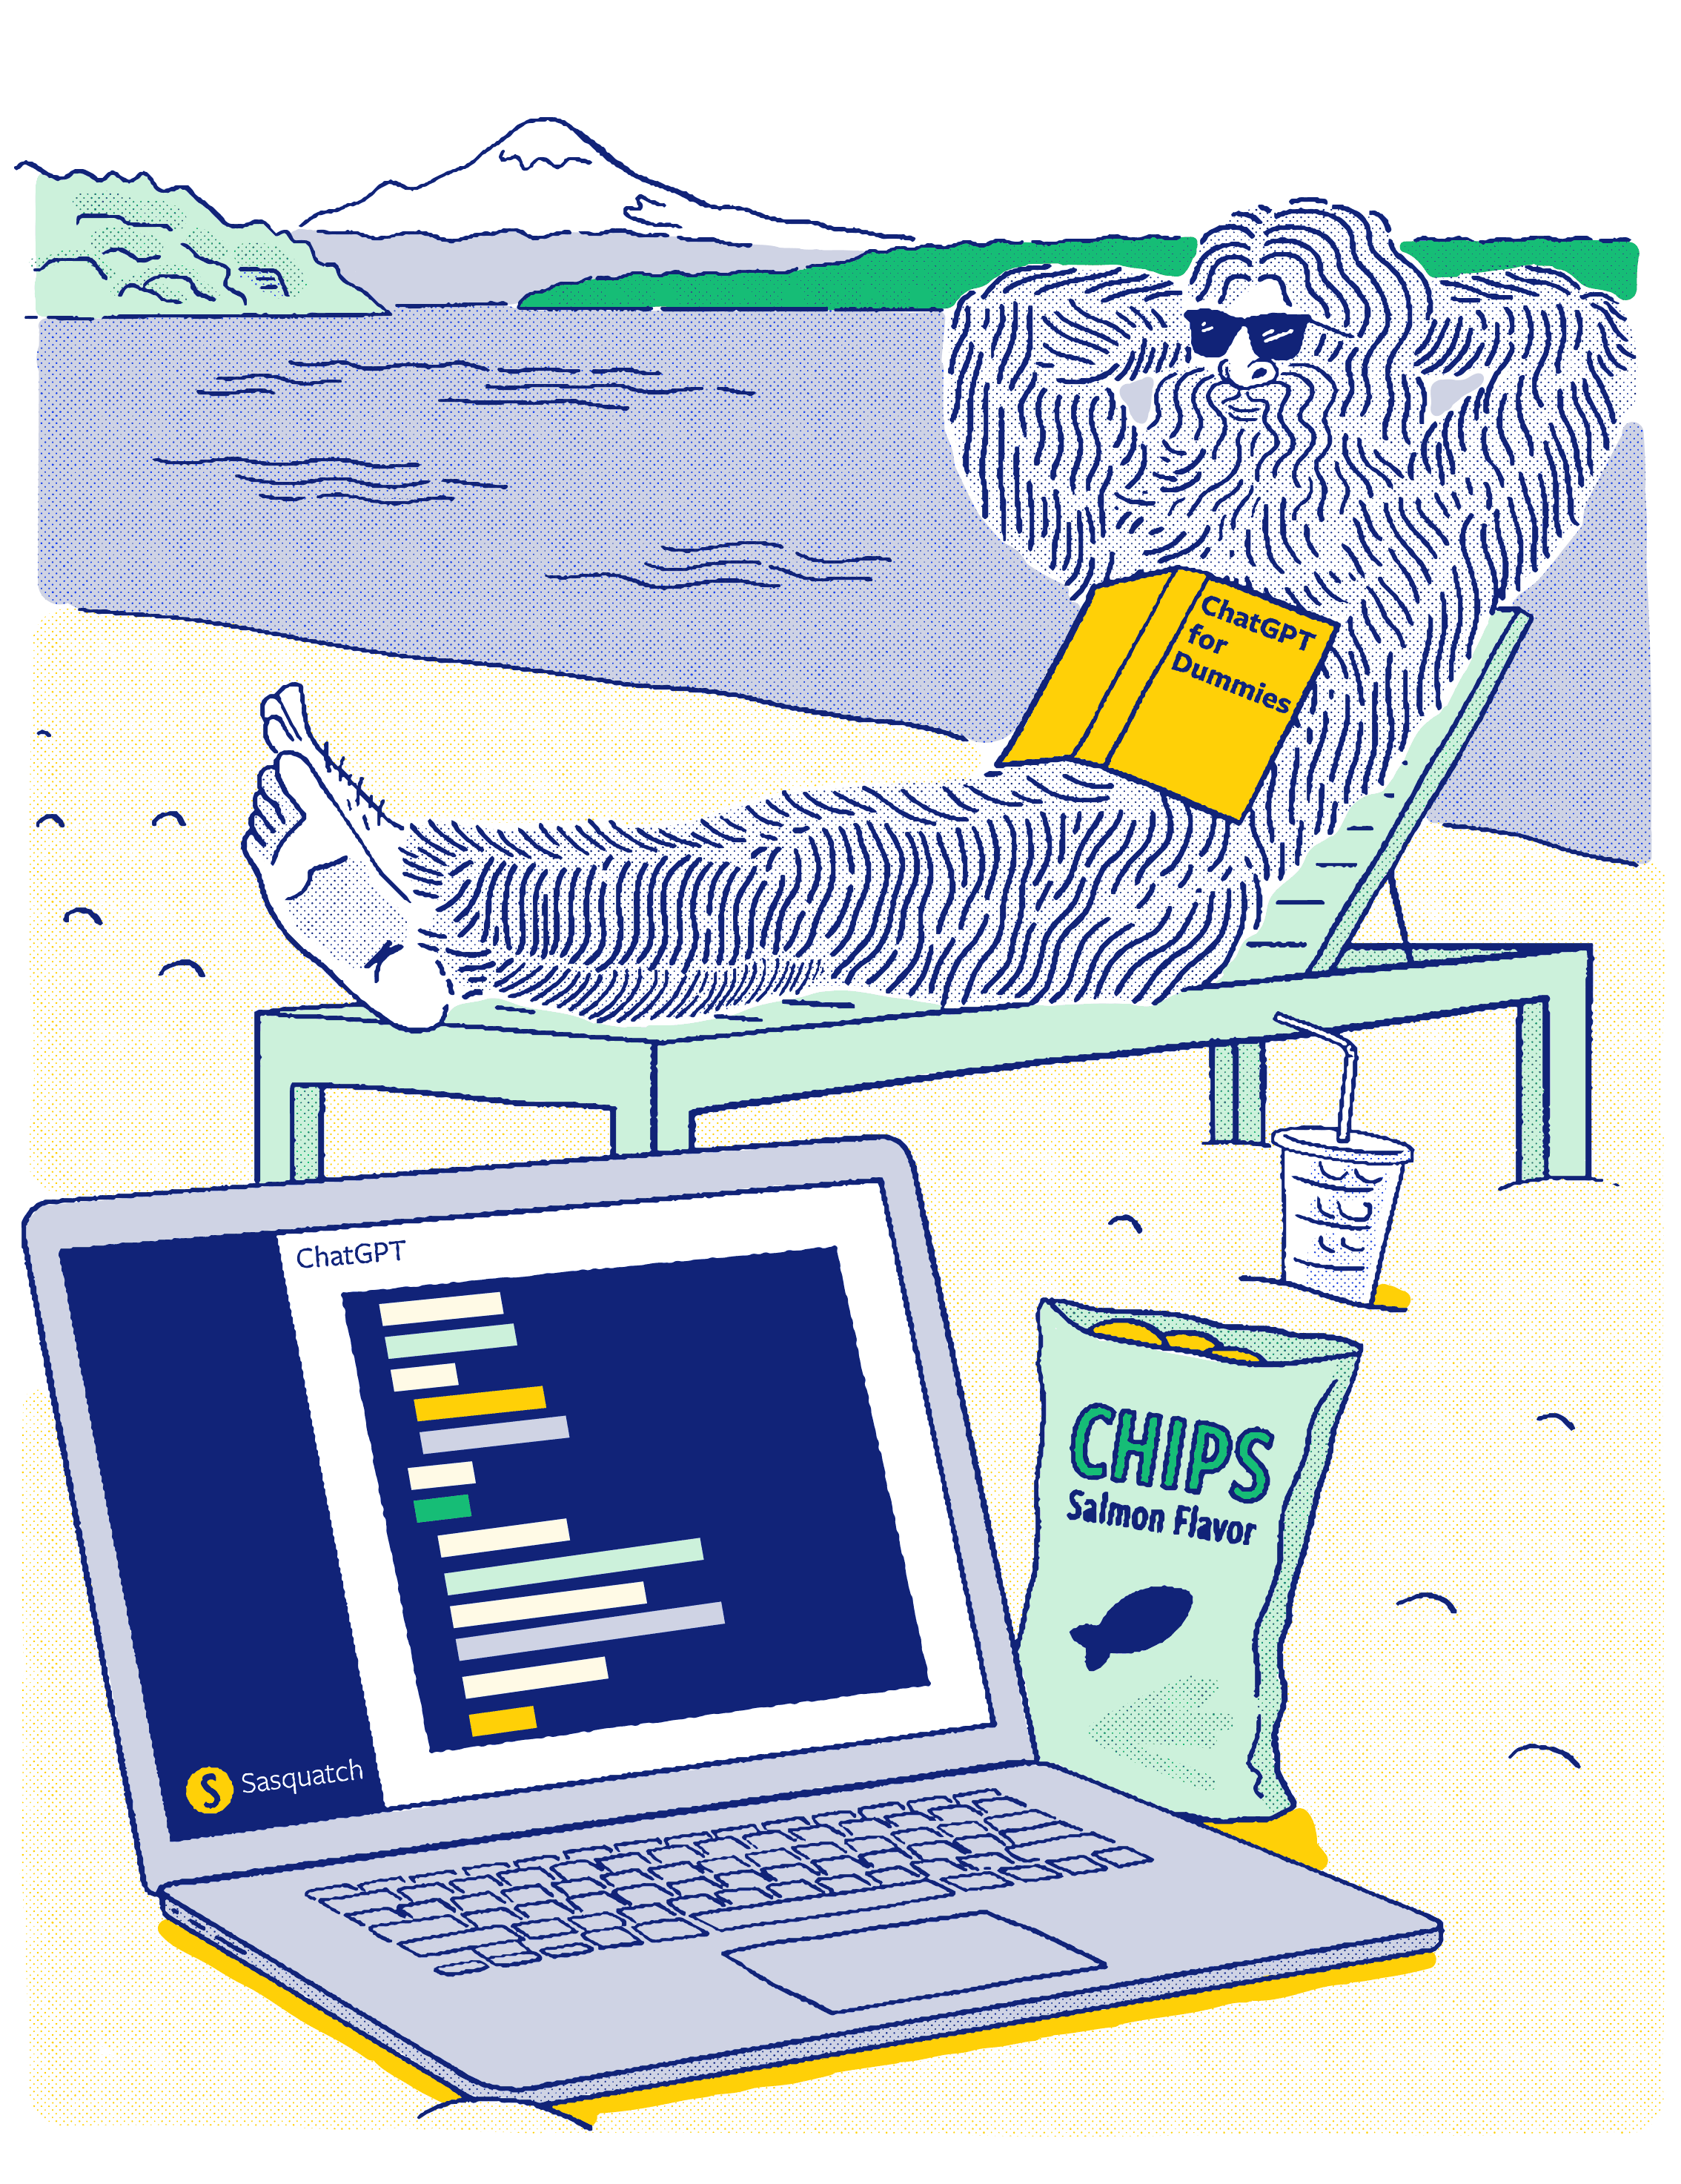 Sasquatch having ChatGPT write his code for him while chilling on a beach